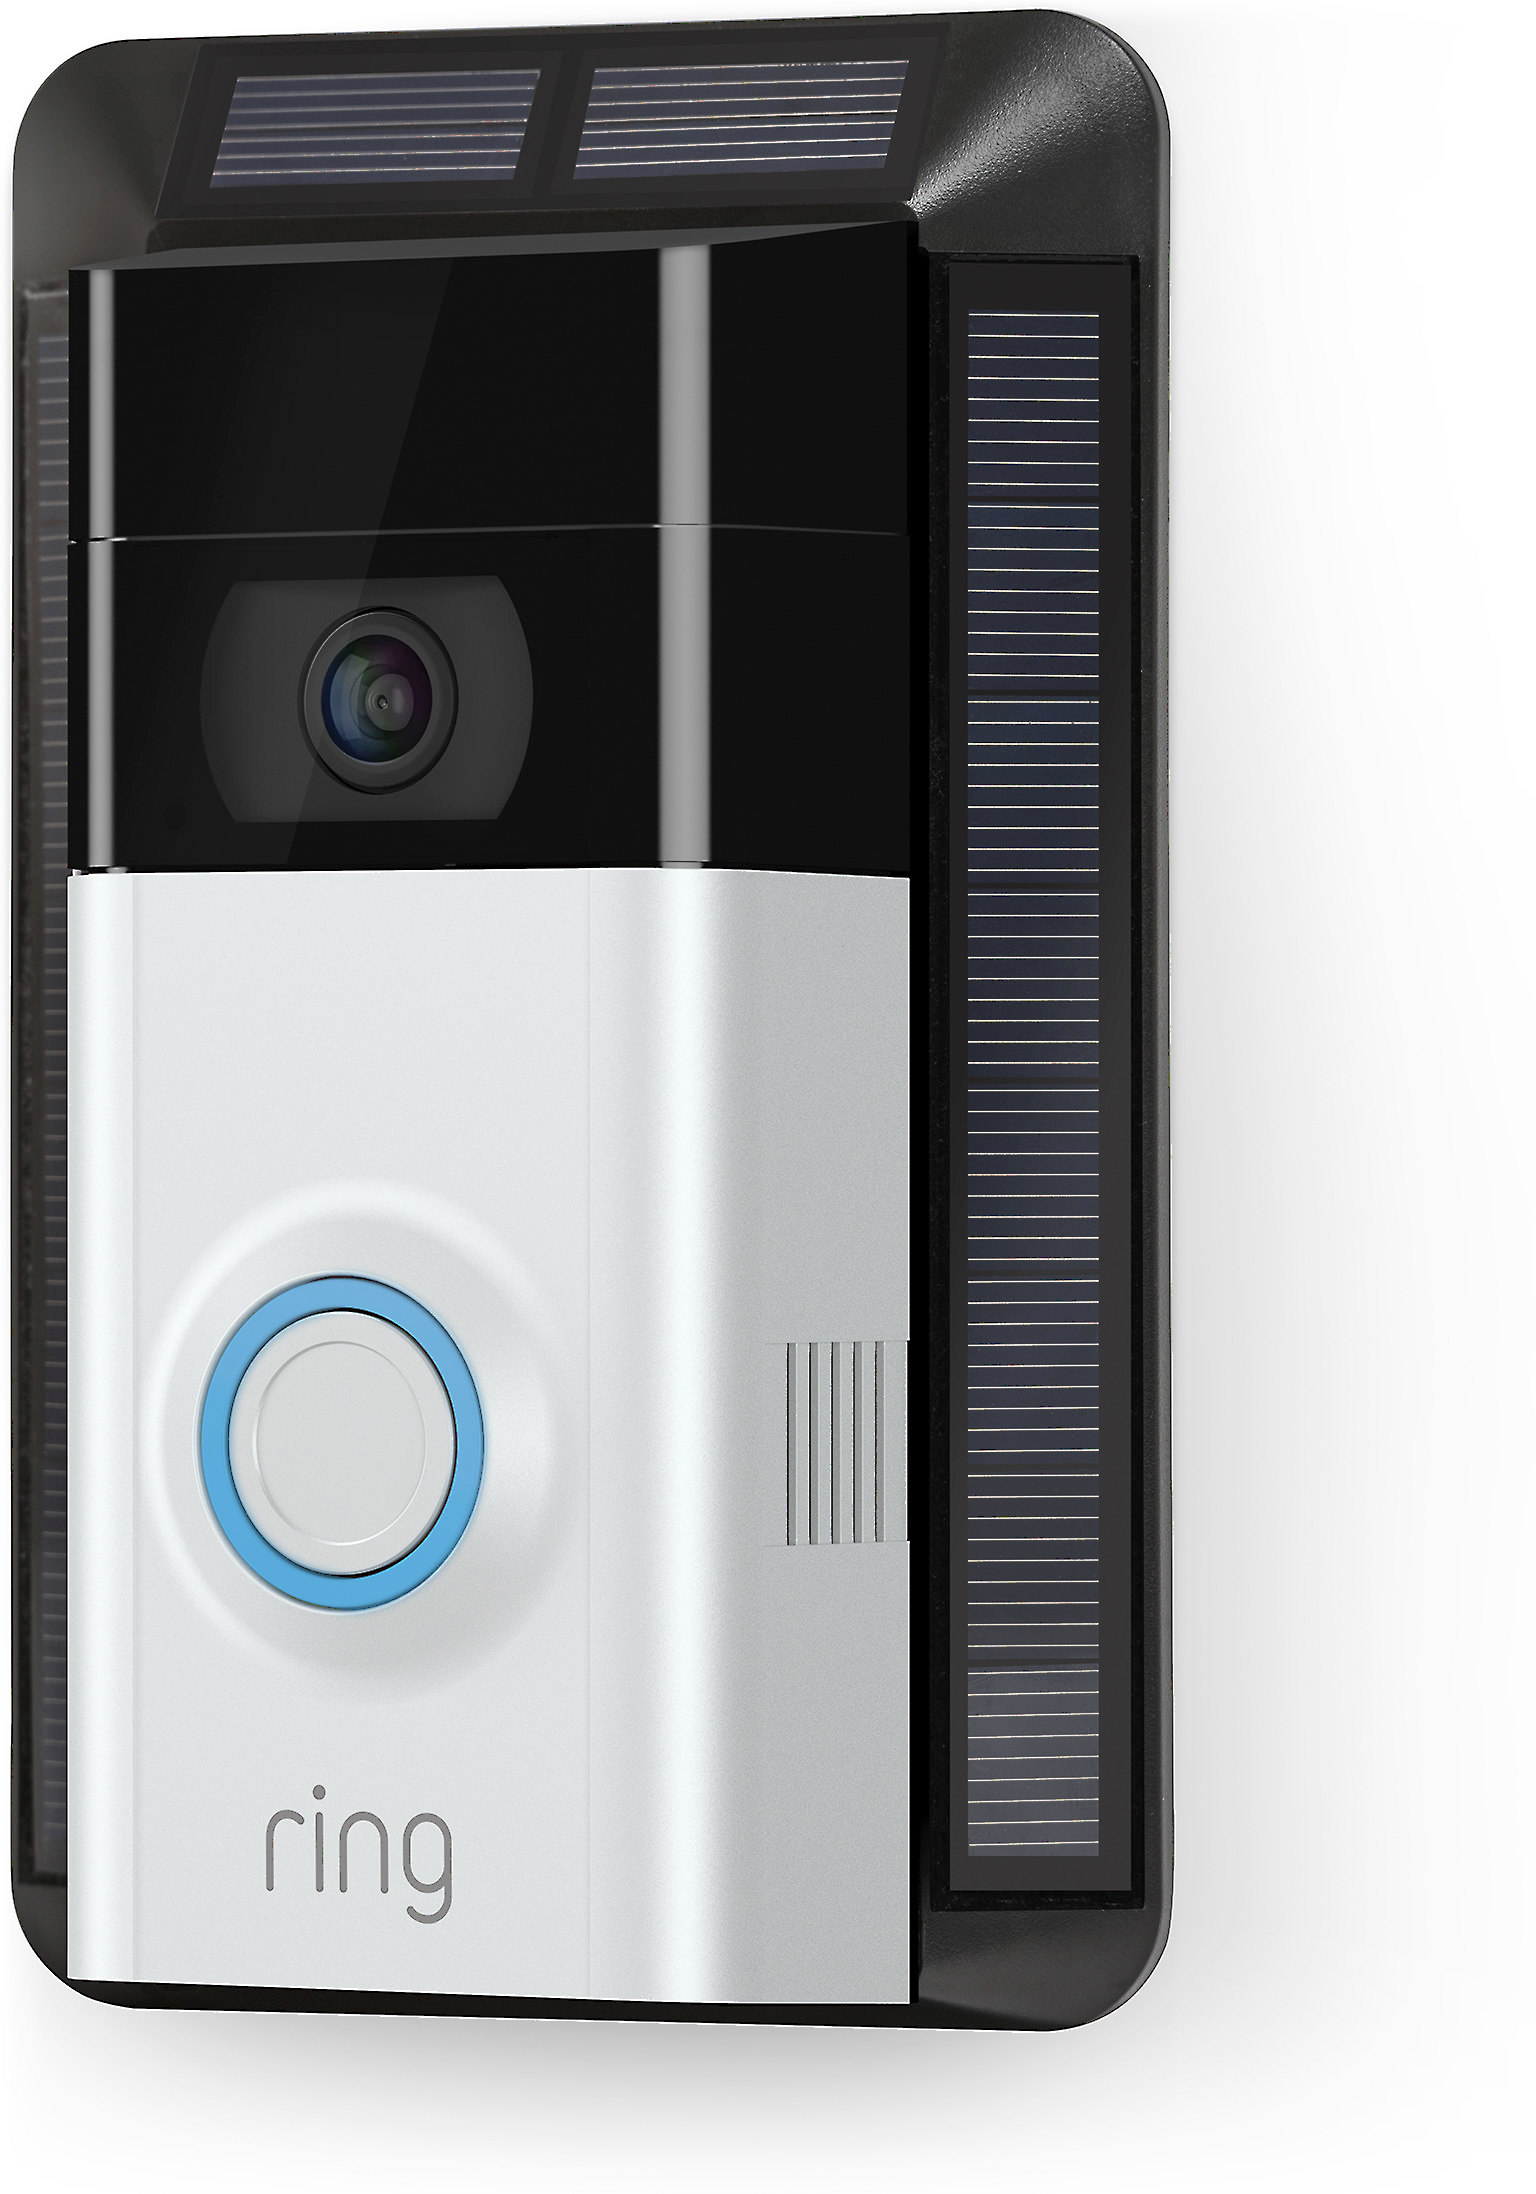 ring video doorbell charging time